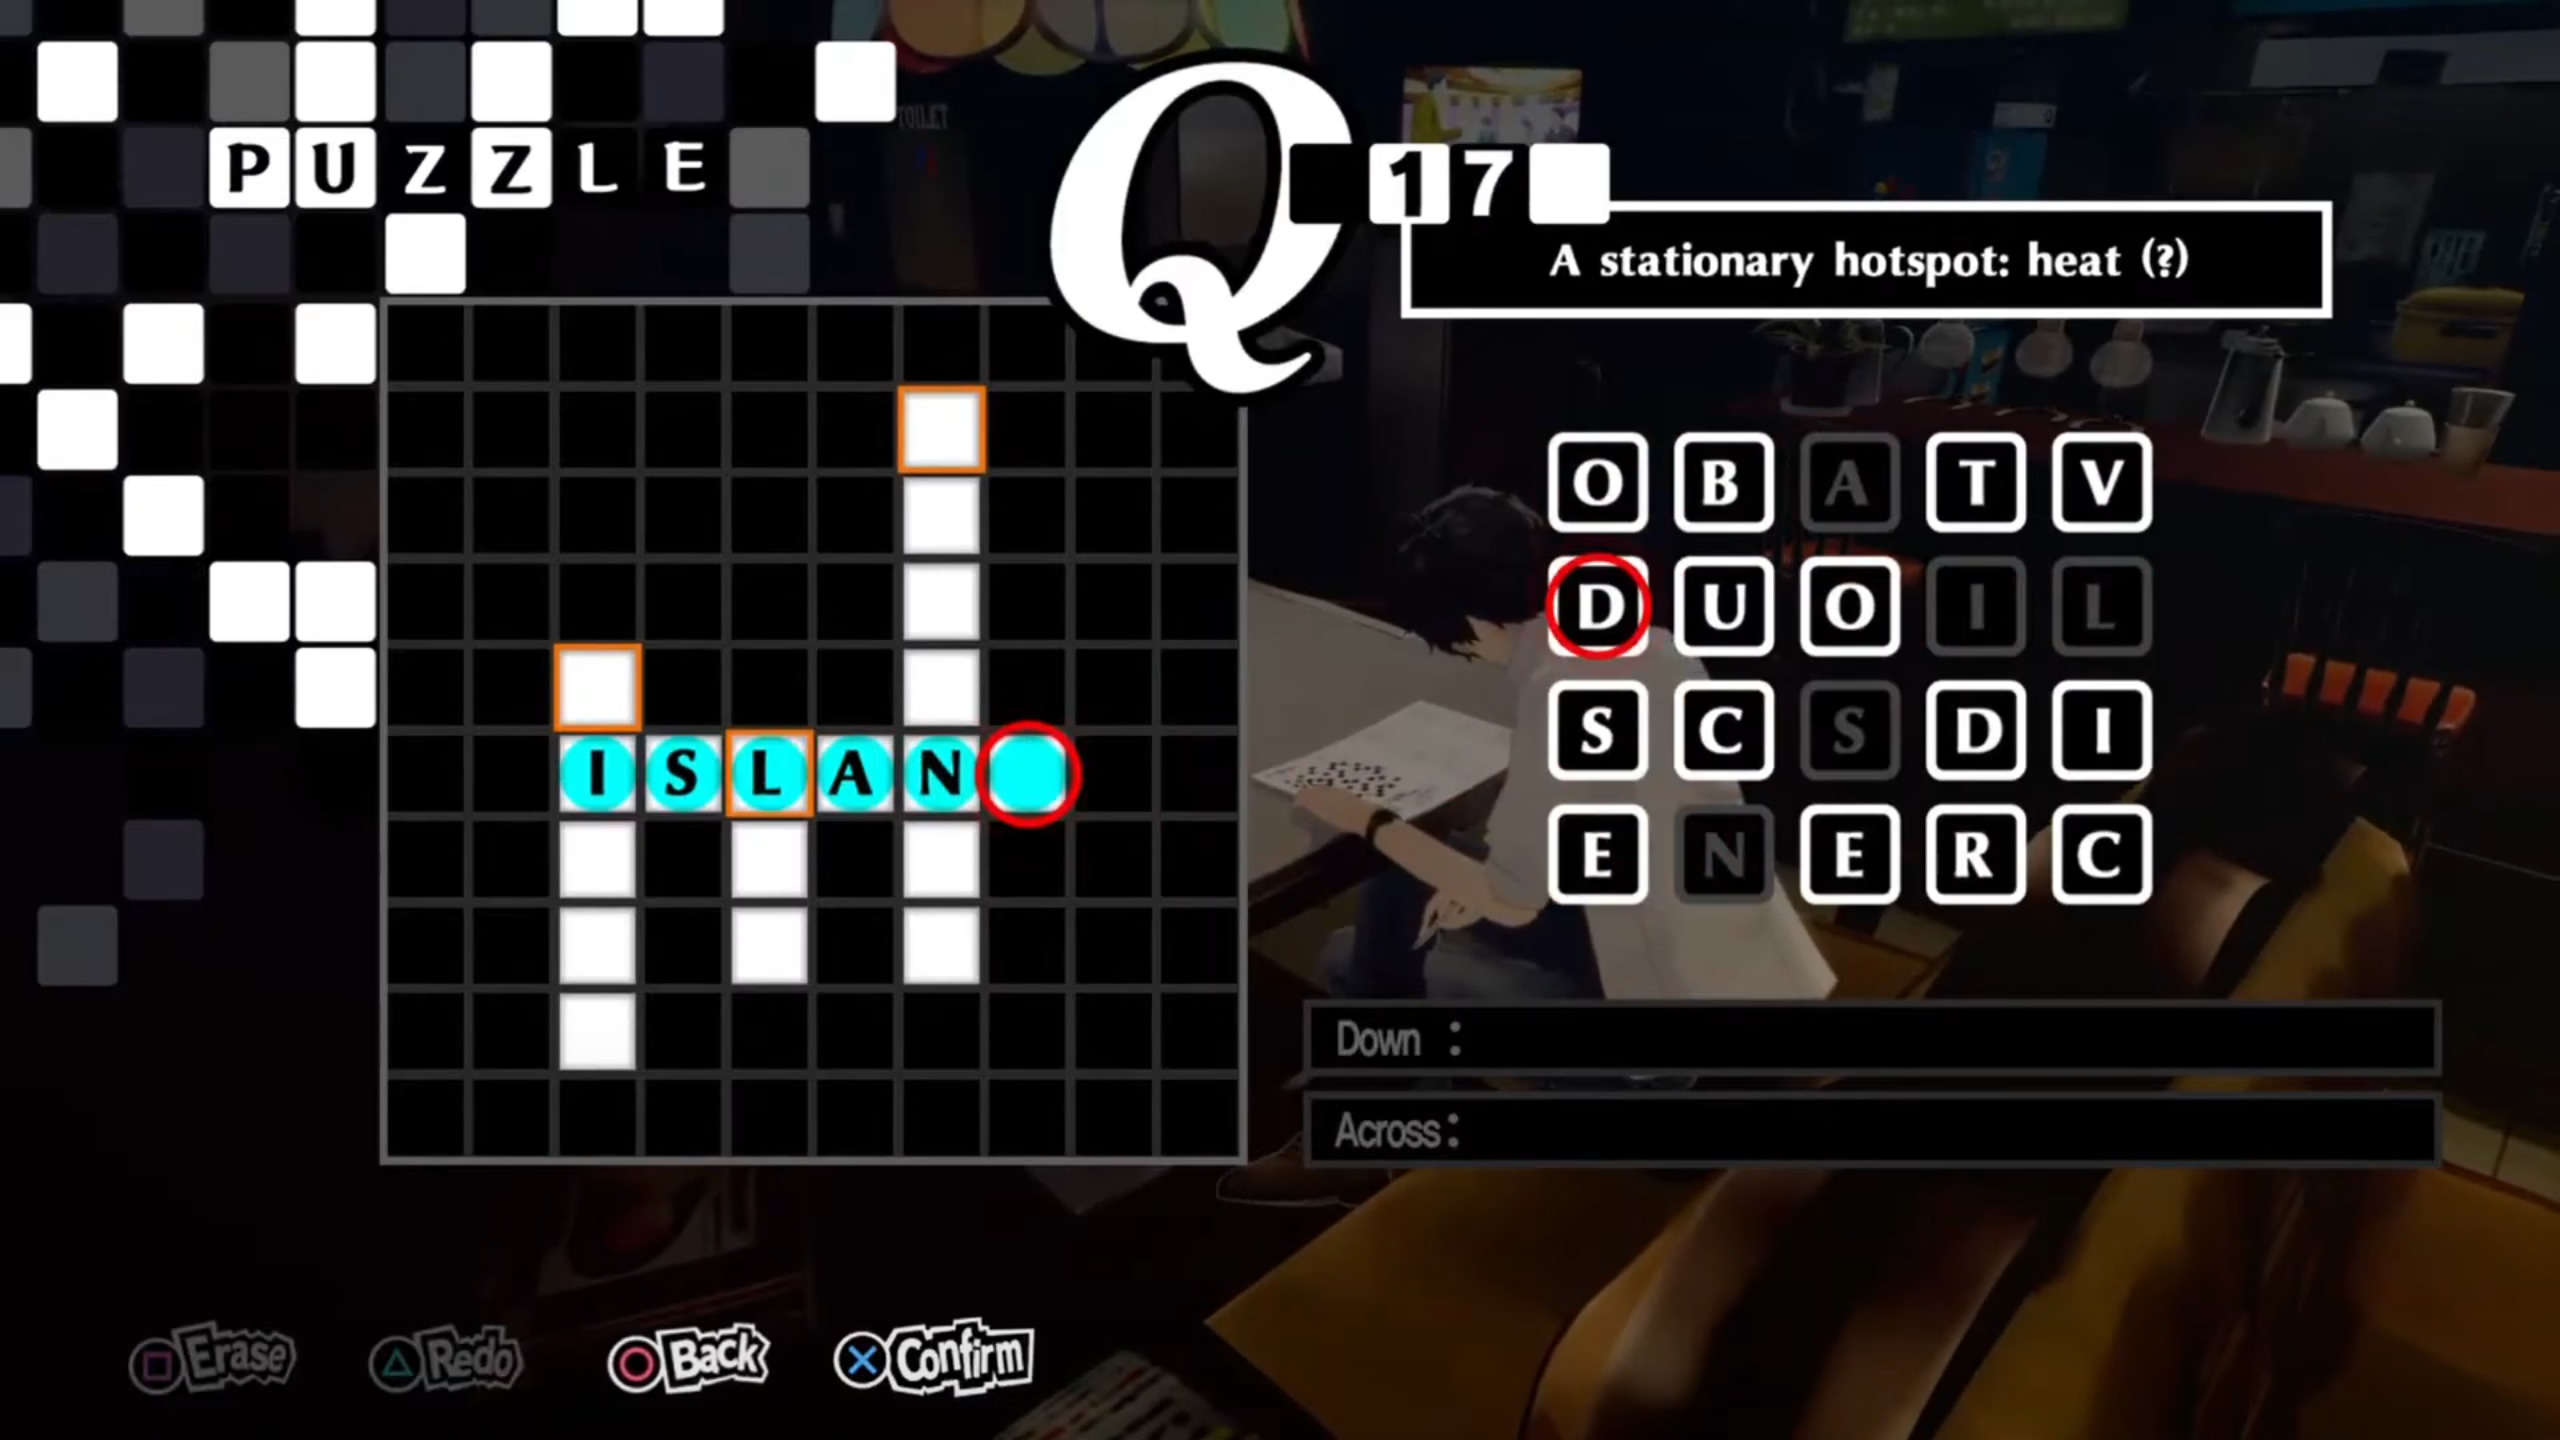 Every Persona 5 Royal Crossword Puzzle Answer - Earn Free Knowledge Points  - GameSpot